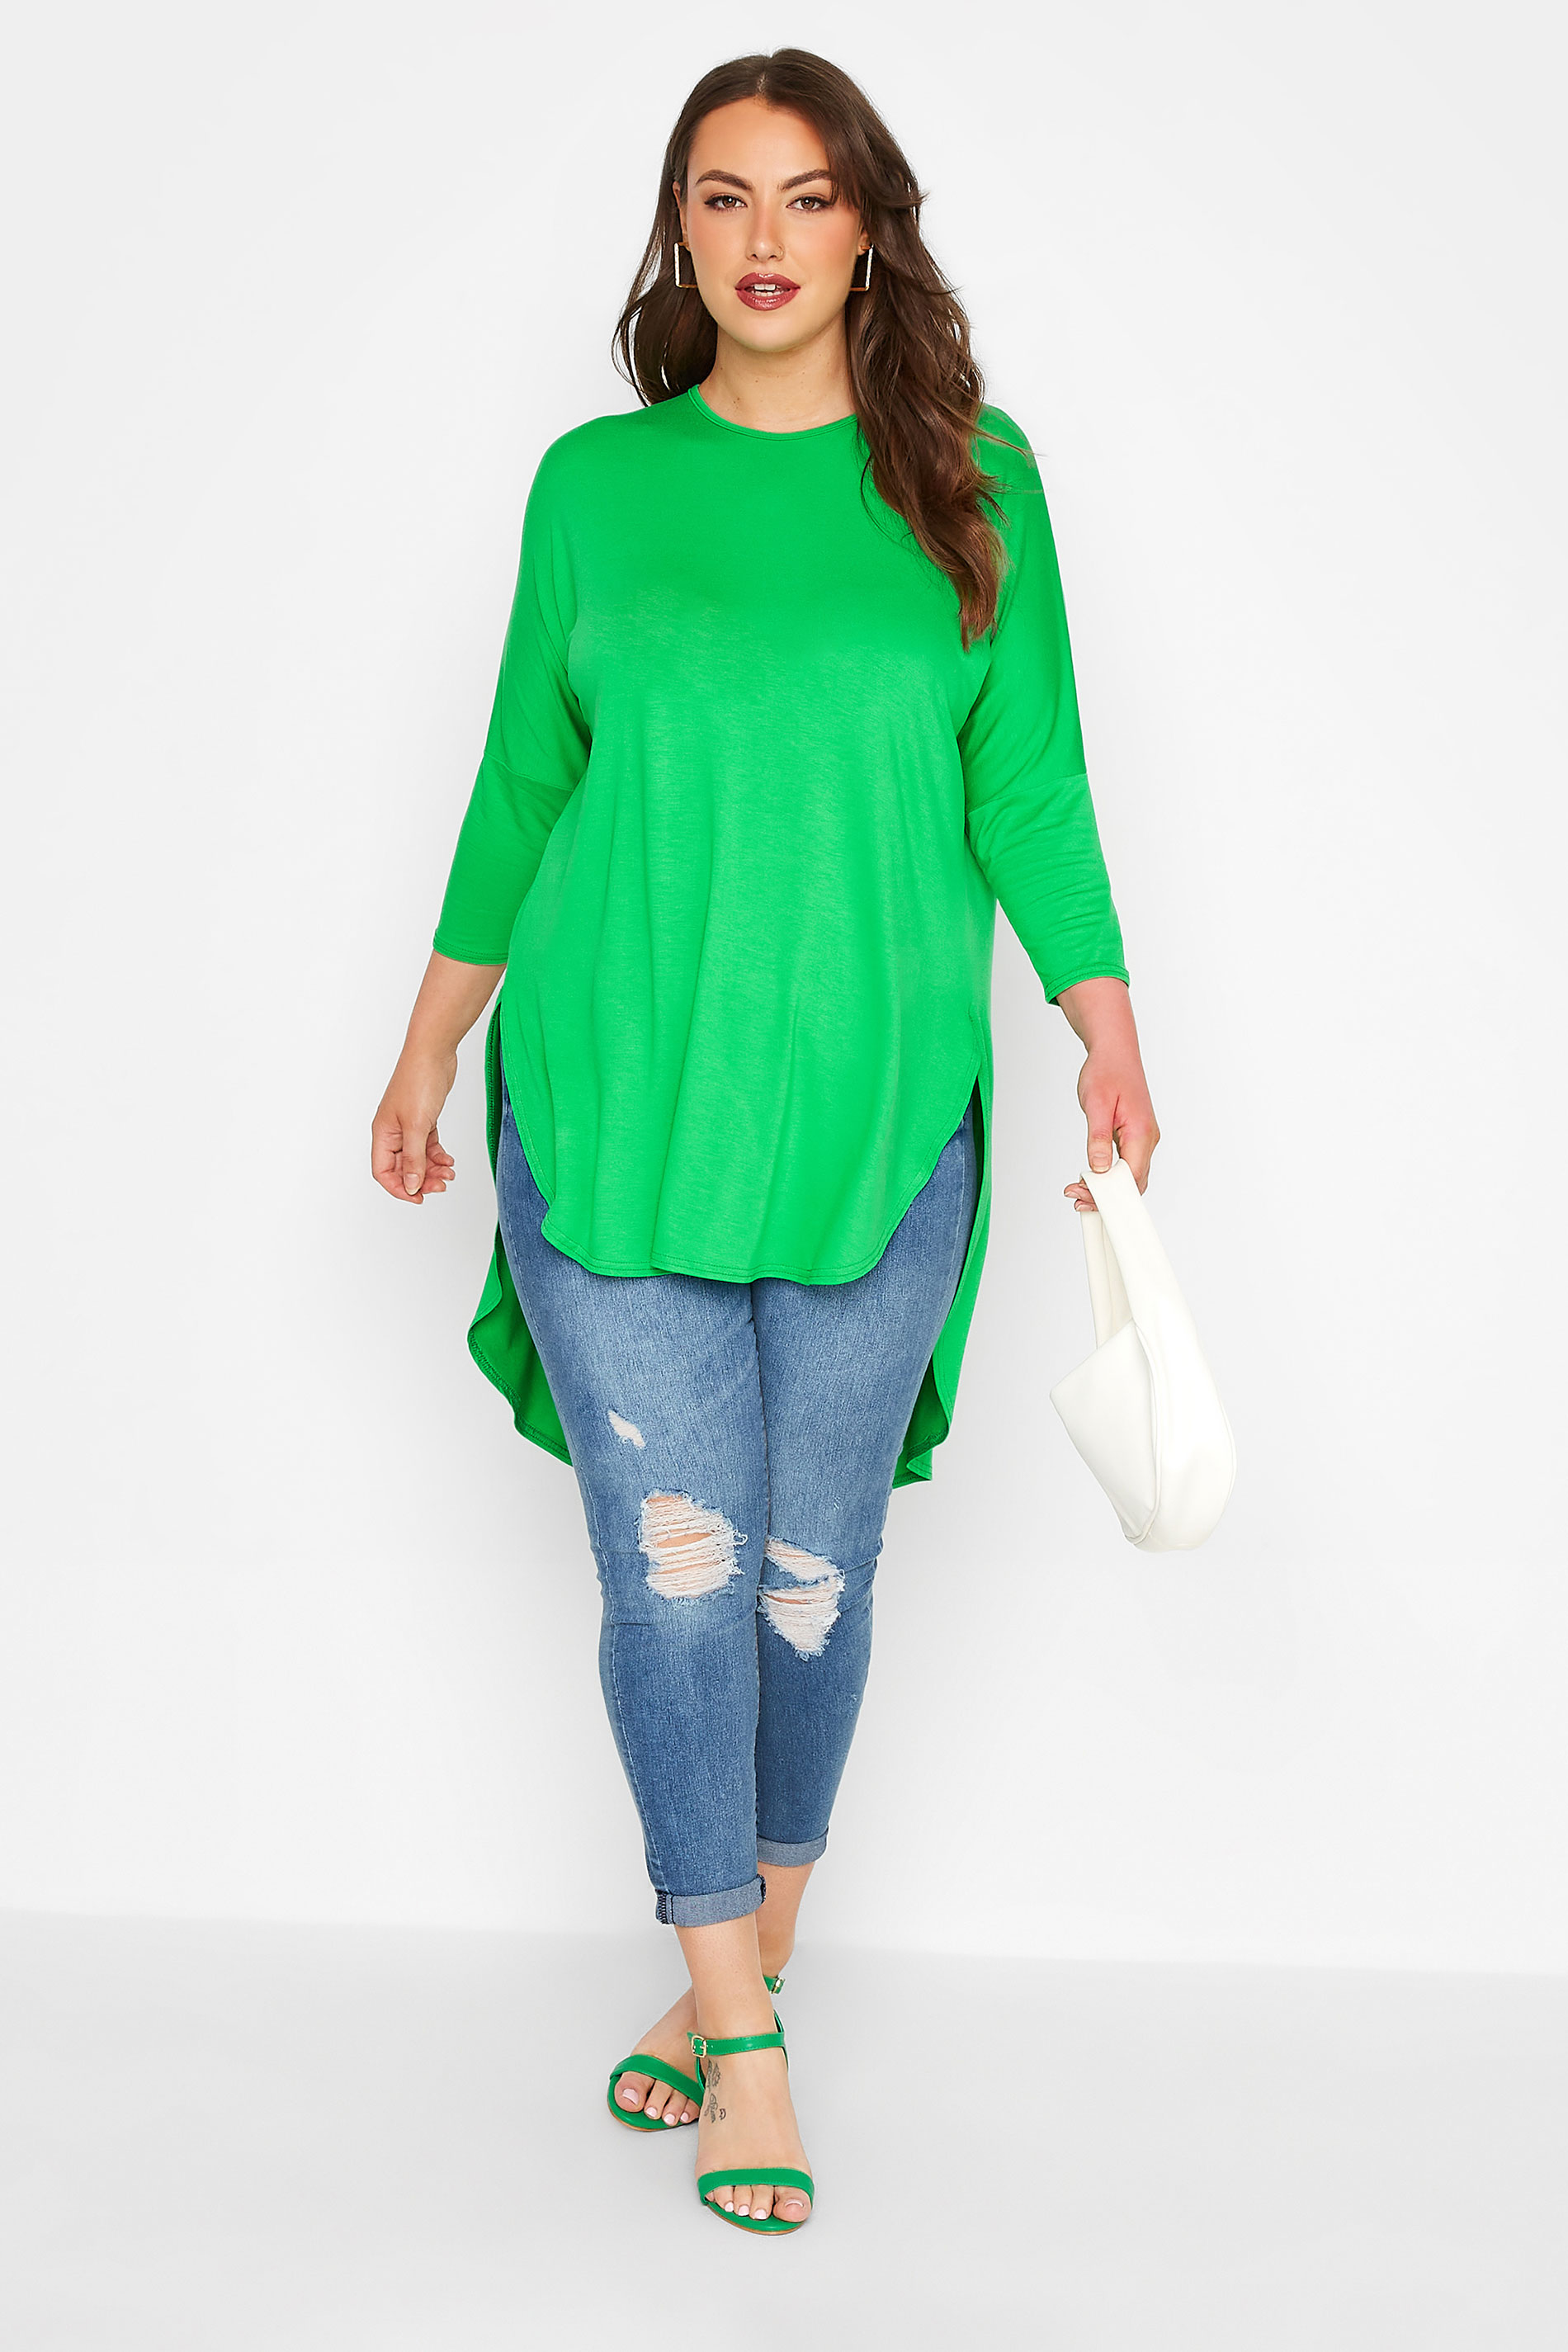 Grande taille  Tops Grande taille  Tops Ourlet Plongeant | LIMITED COLLECTION - T-Shirt Vert Pomme Manches Longues Ourlet Plongeant - NH29814